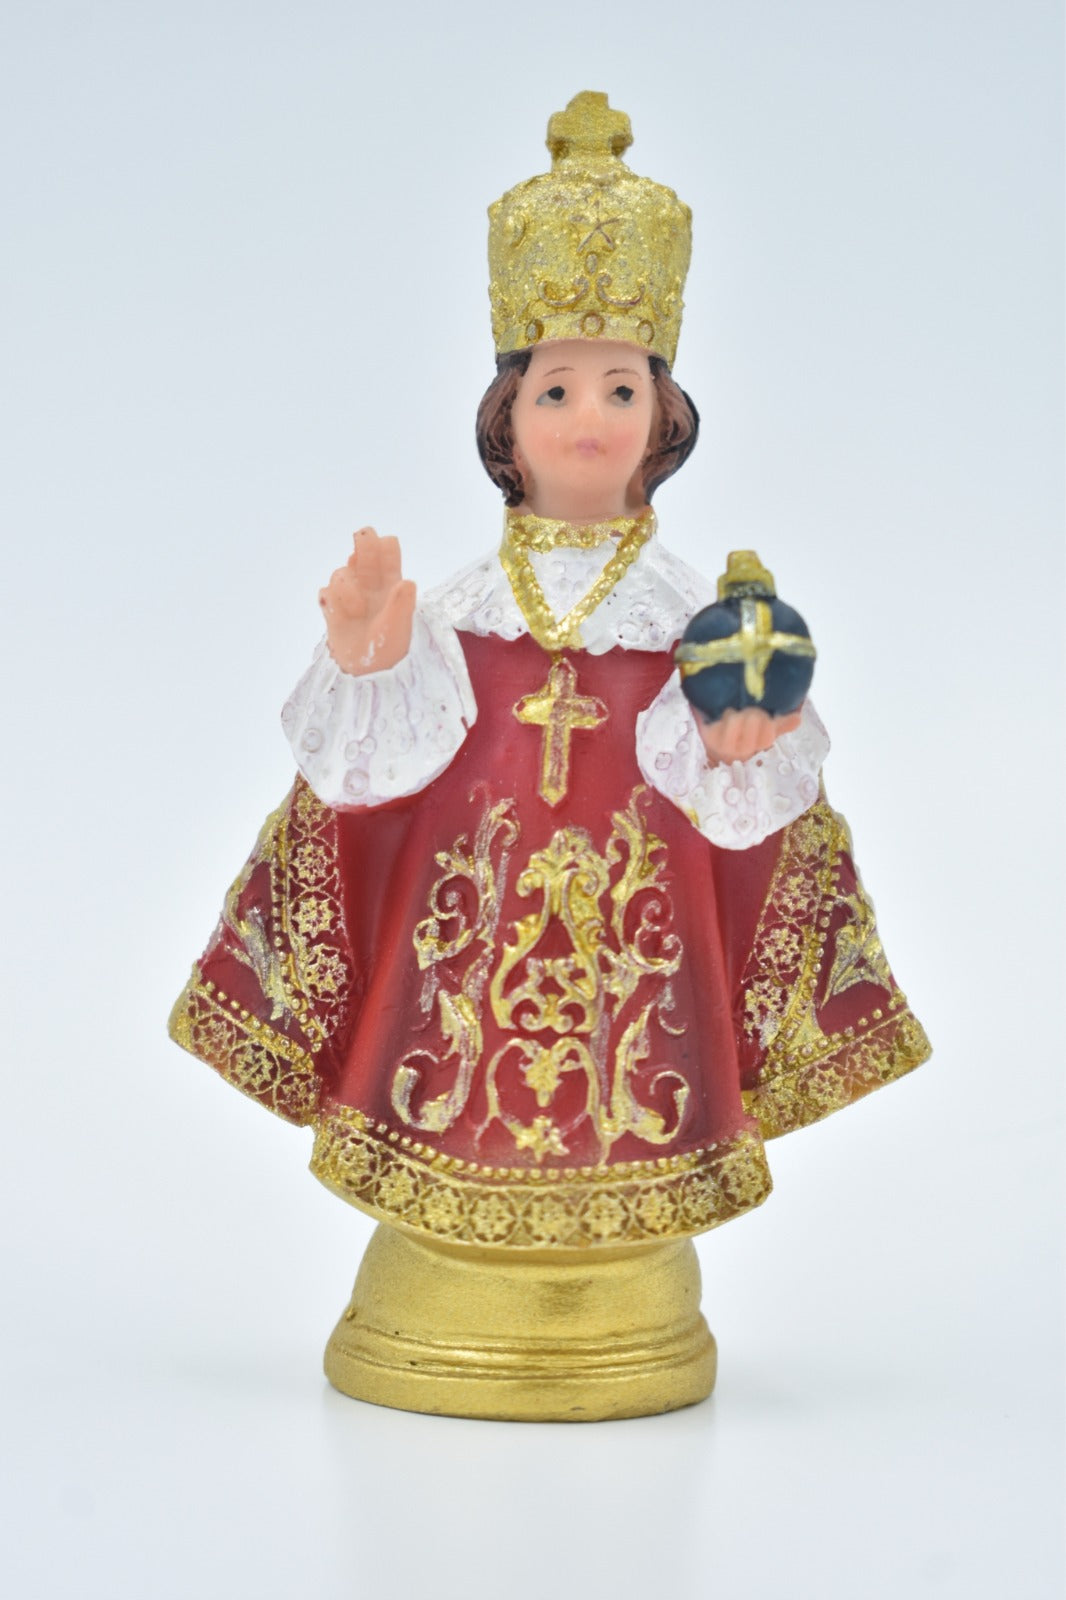 3.5 Inch Infant Jesus Statue - Handcrafted with Love and Devotion